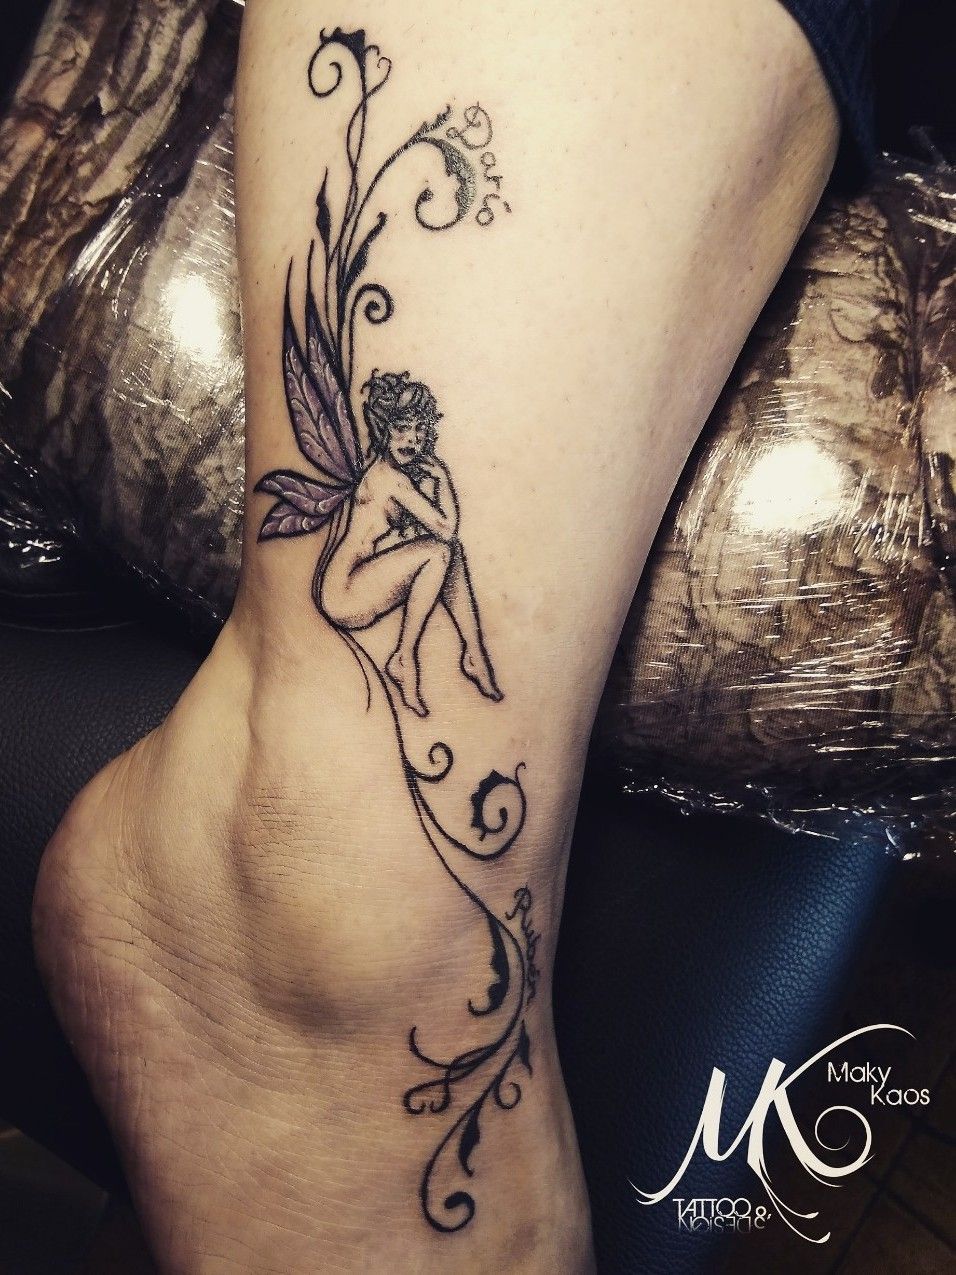 Fairy Tattoos Meanings Tattoo Designs  More